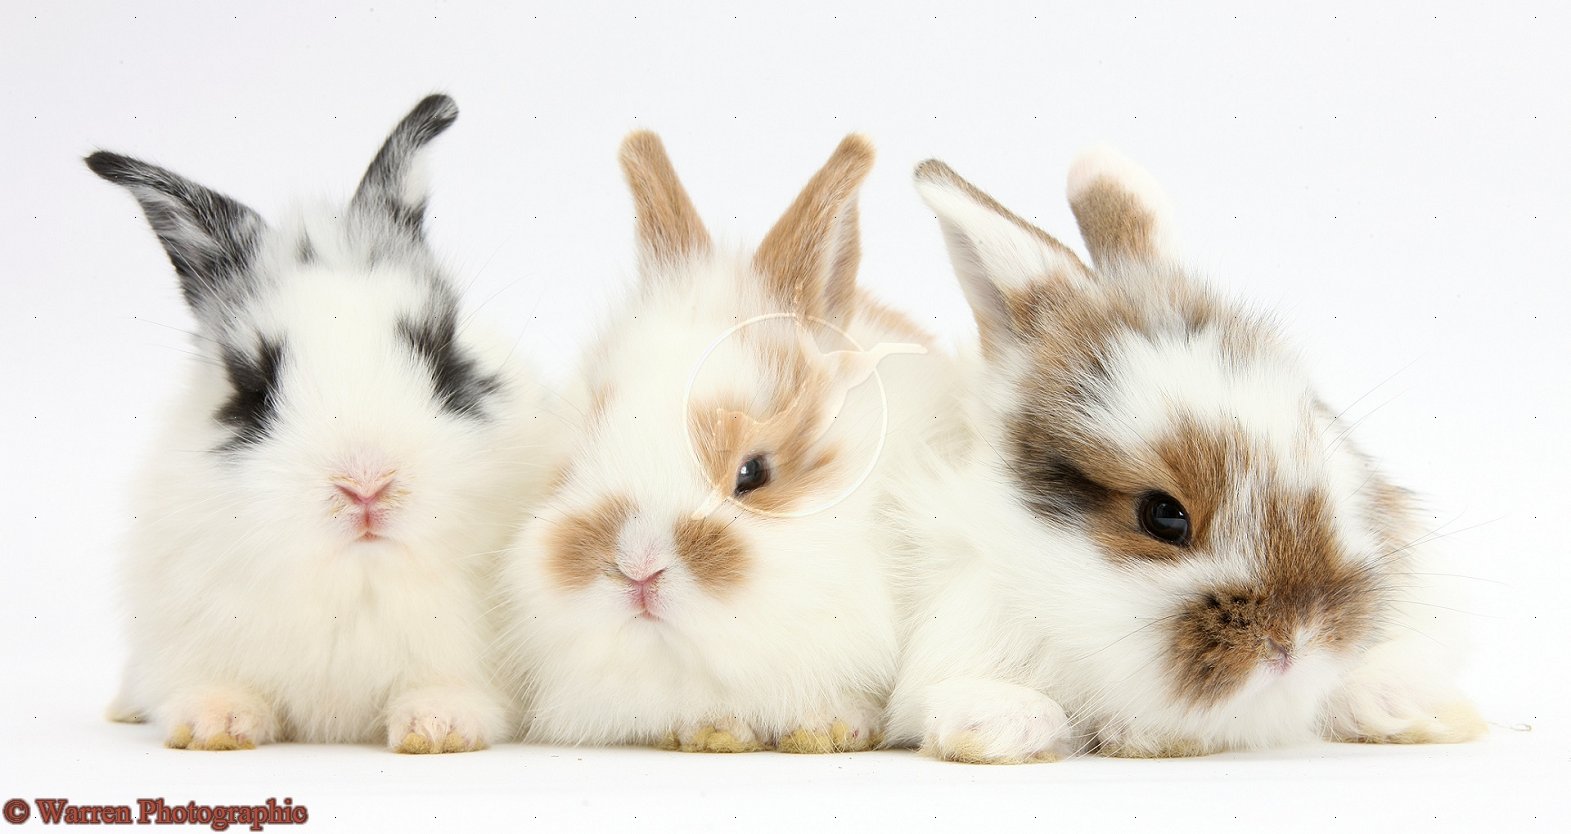 imagescicomCute Baby Rabbits 9338 Hd Wallpapers in Animals   Imagesci